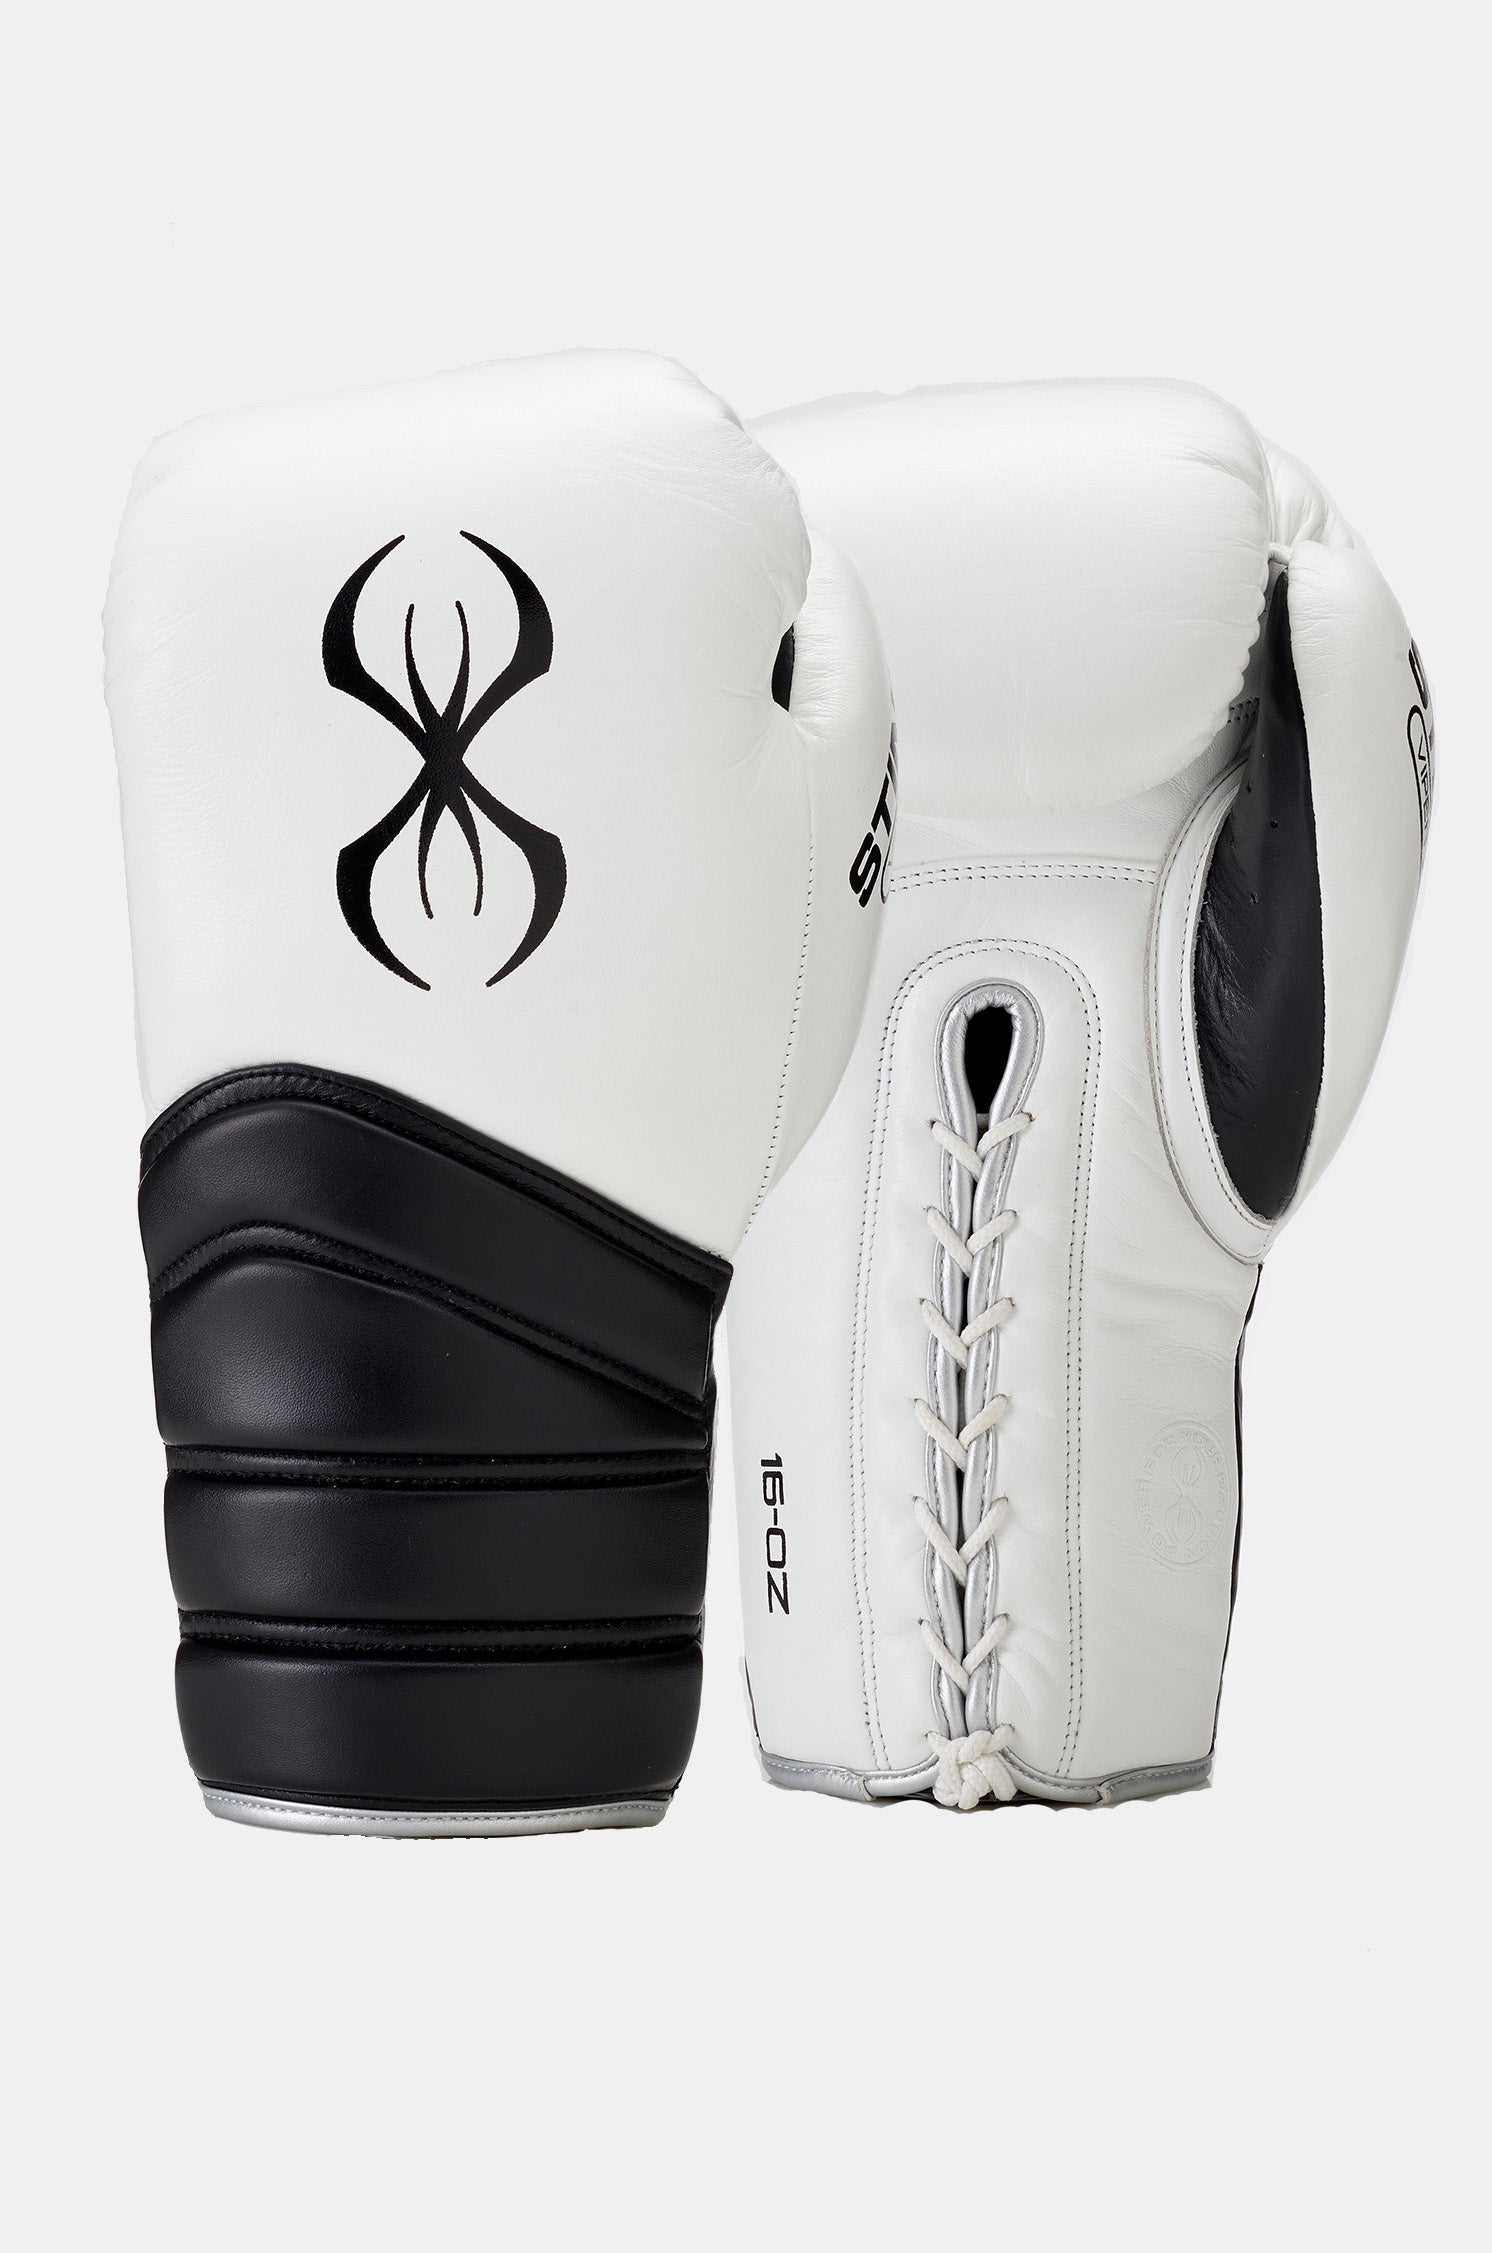 Red IBA Approved Competition Boxing Gloves – STING USA